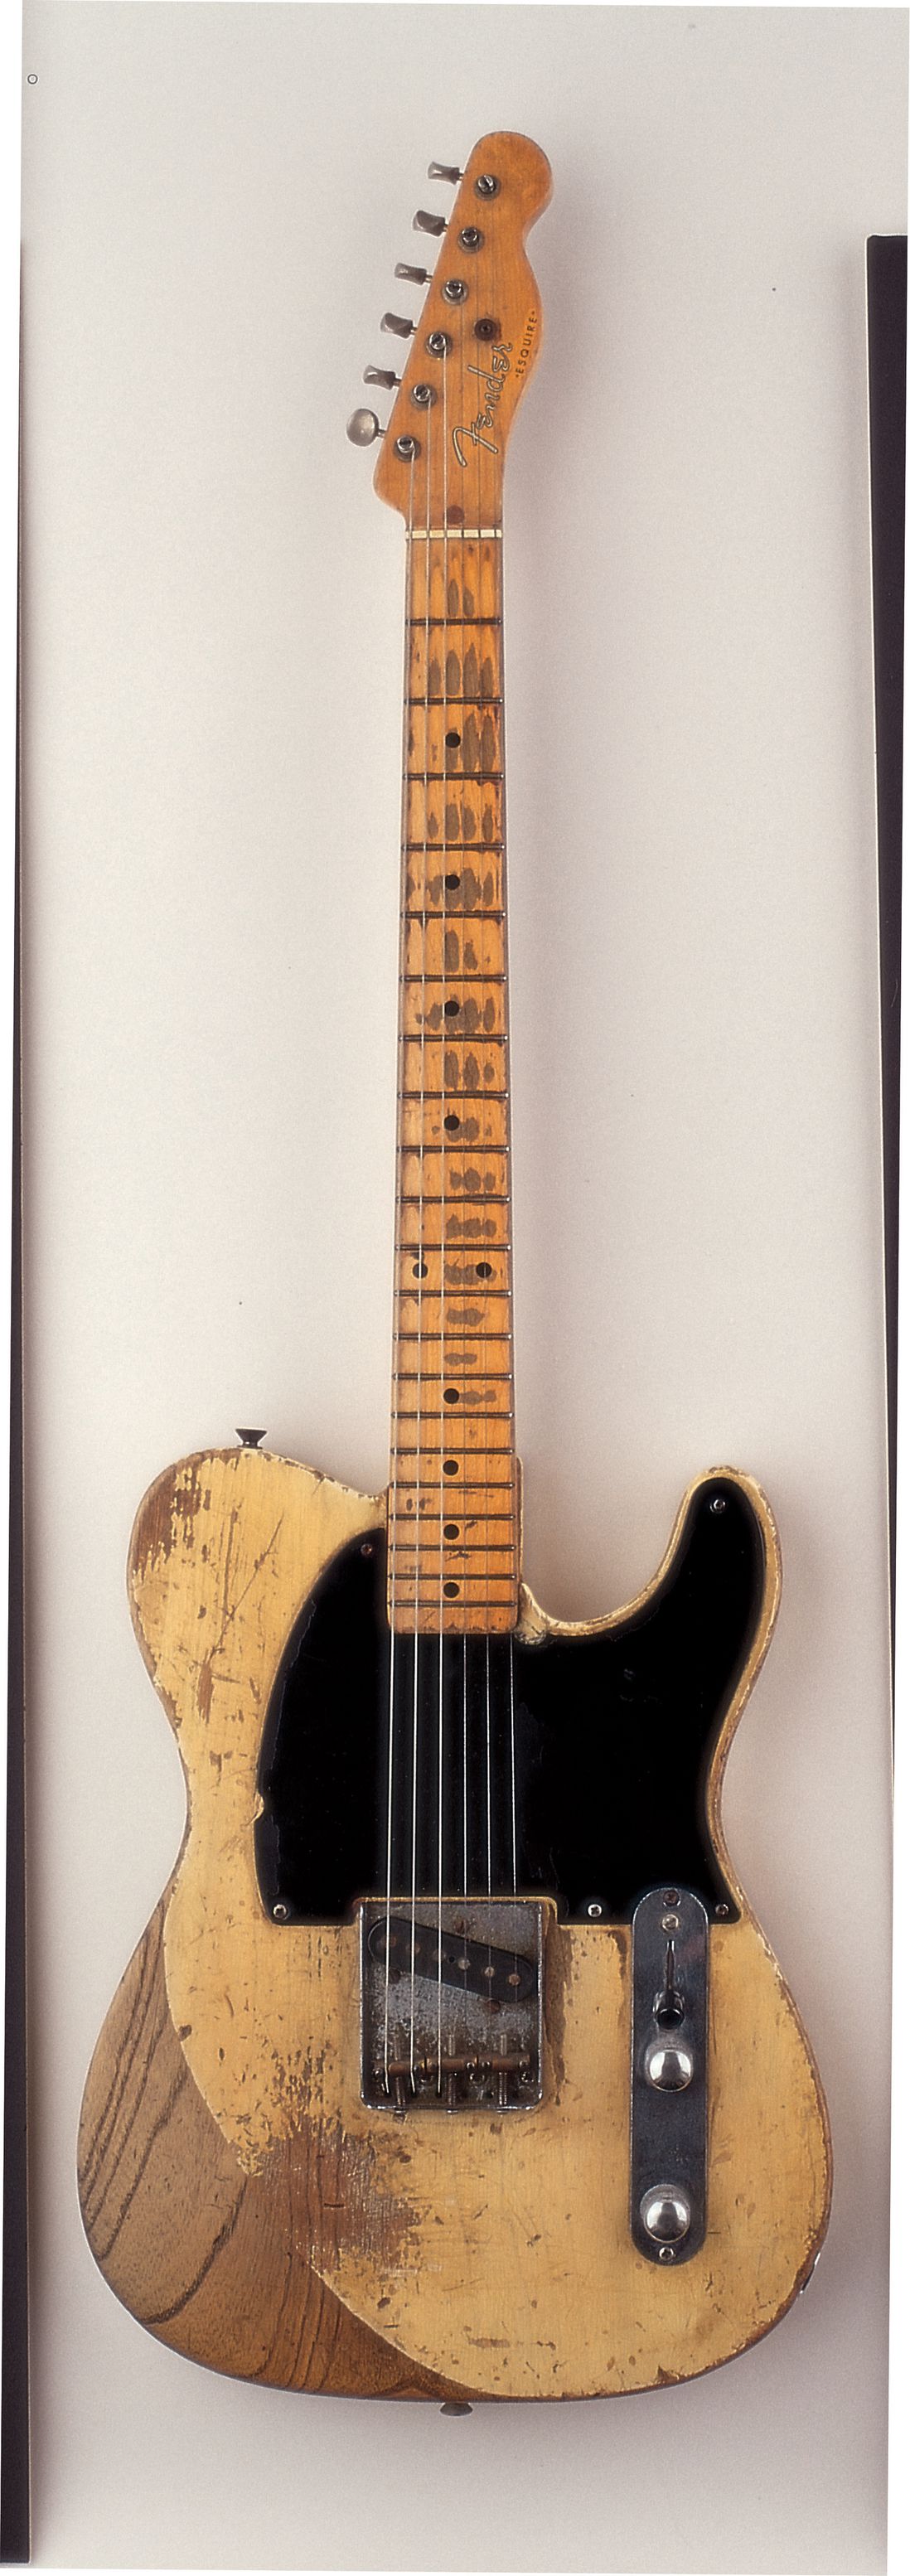 Jeff Beck's Fender Esquire, called "The Ugliest Guitar." He used it while playing with The Yardbirds on songs such as "Heart Full Of Soul" and "Shape Of Things."